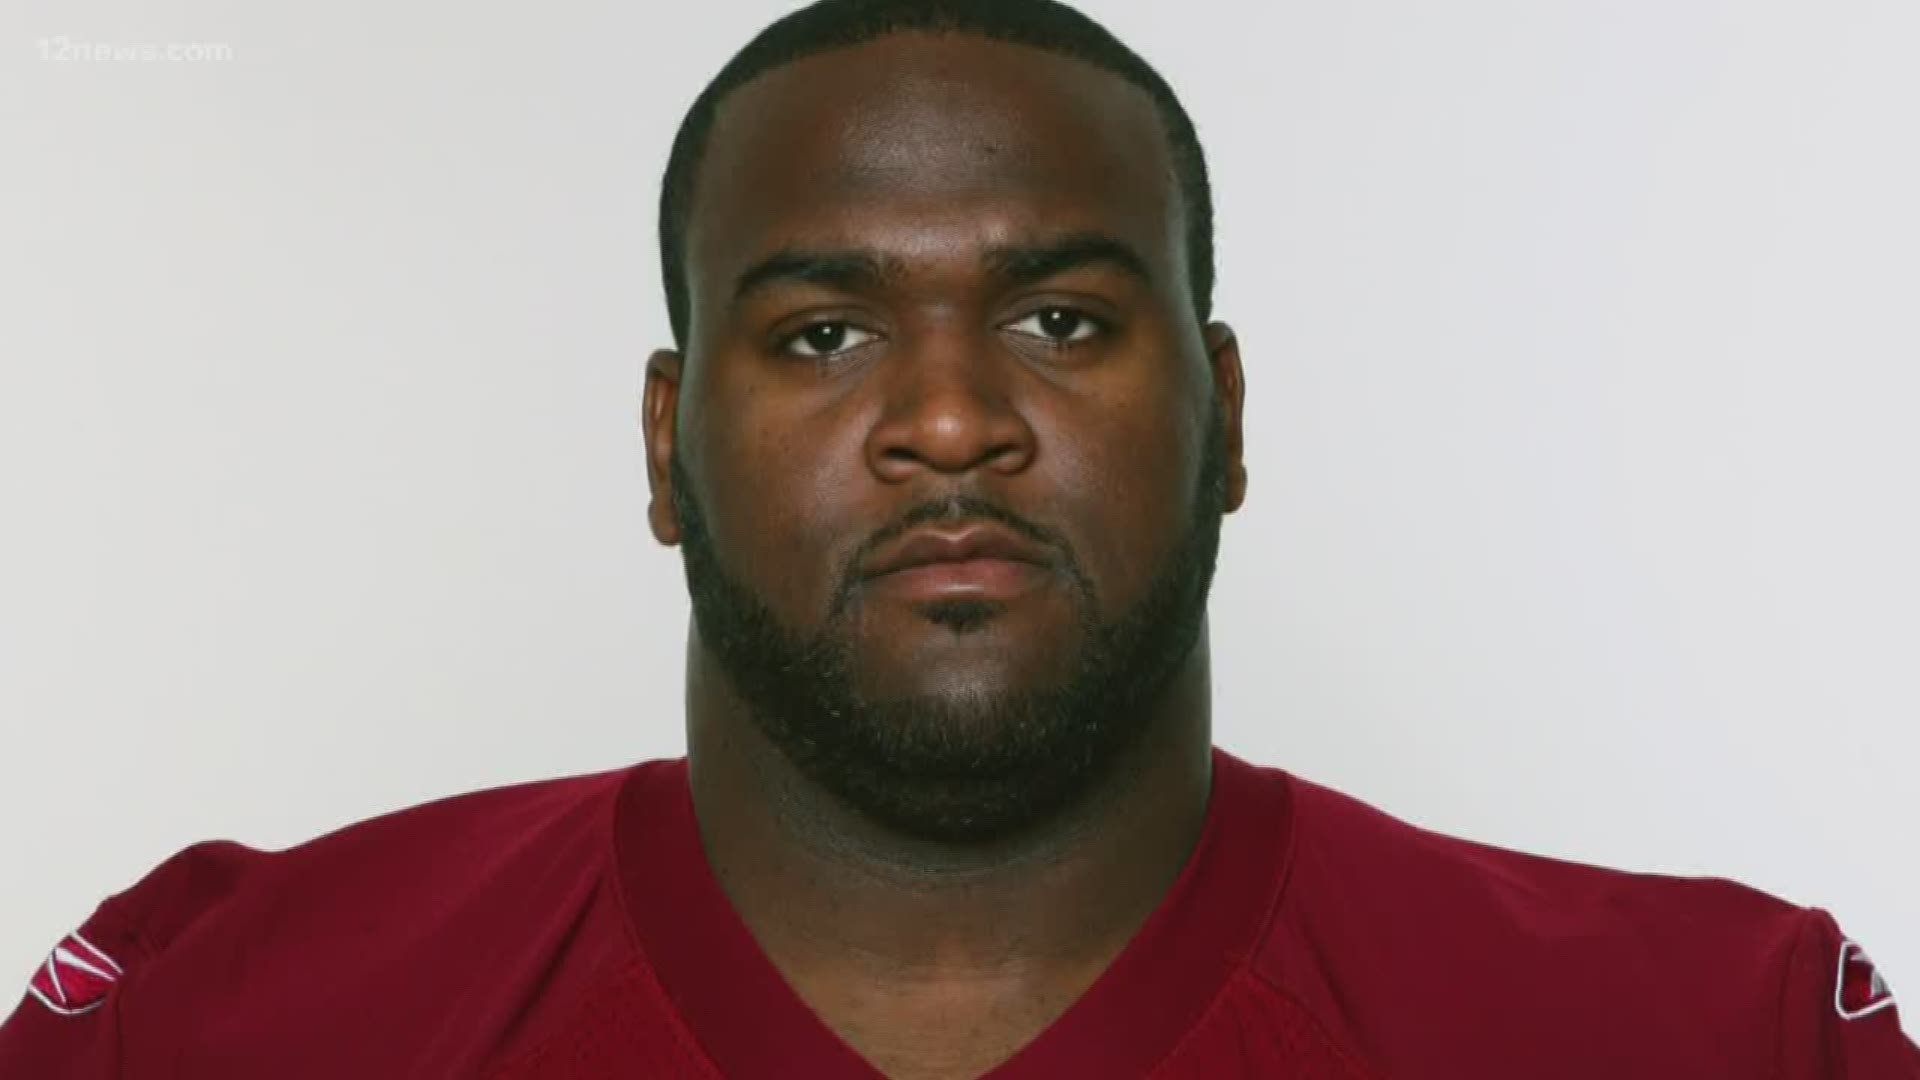 Court records show former Cardinals lineman Jeremy Bridges owes more than $107,000 in child support. Bridges' ex says he hasn't seen his son since 2007.